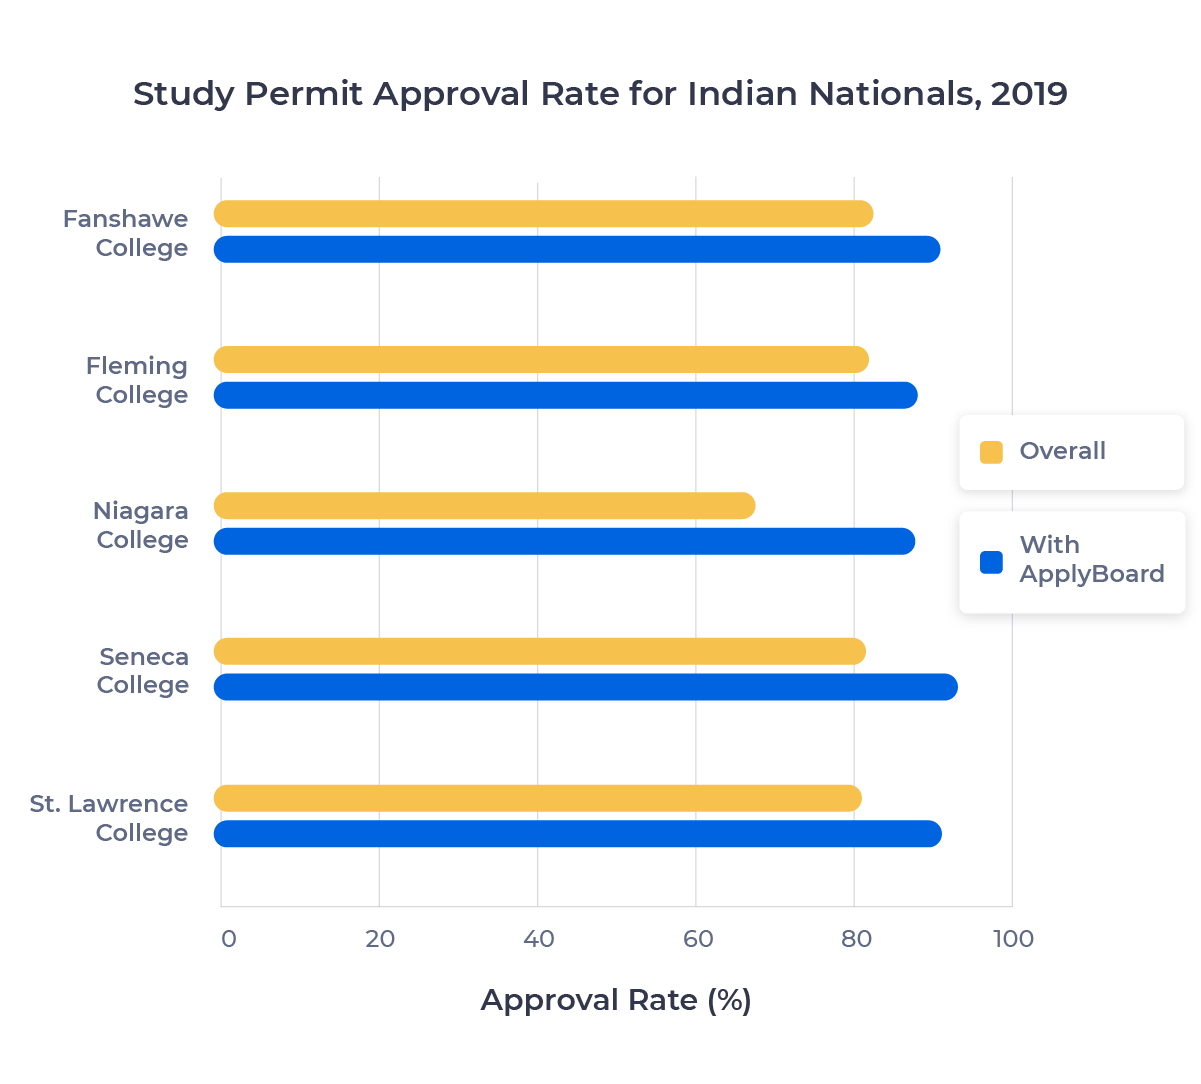 Bar chart contrasting the overall study permit approval rate for Indian students applying to selected colleges with their approval rate through ApplyBoard.